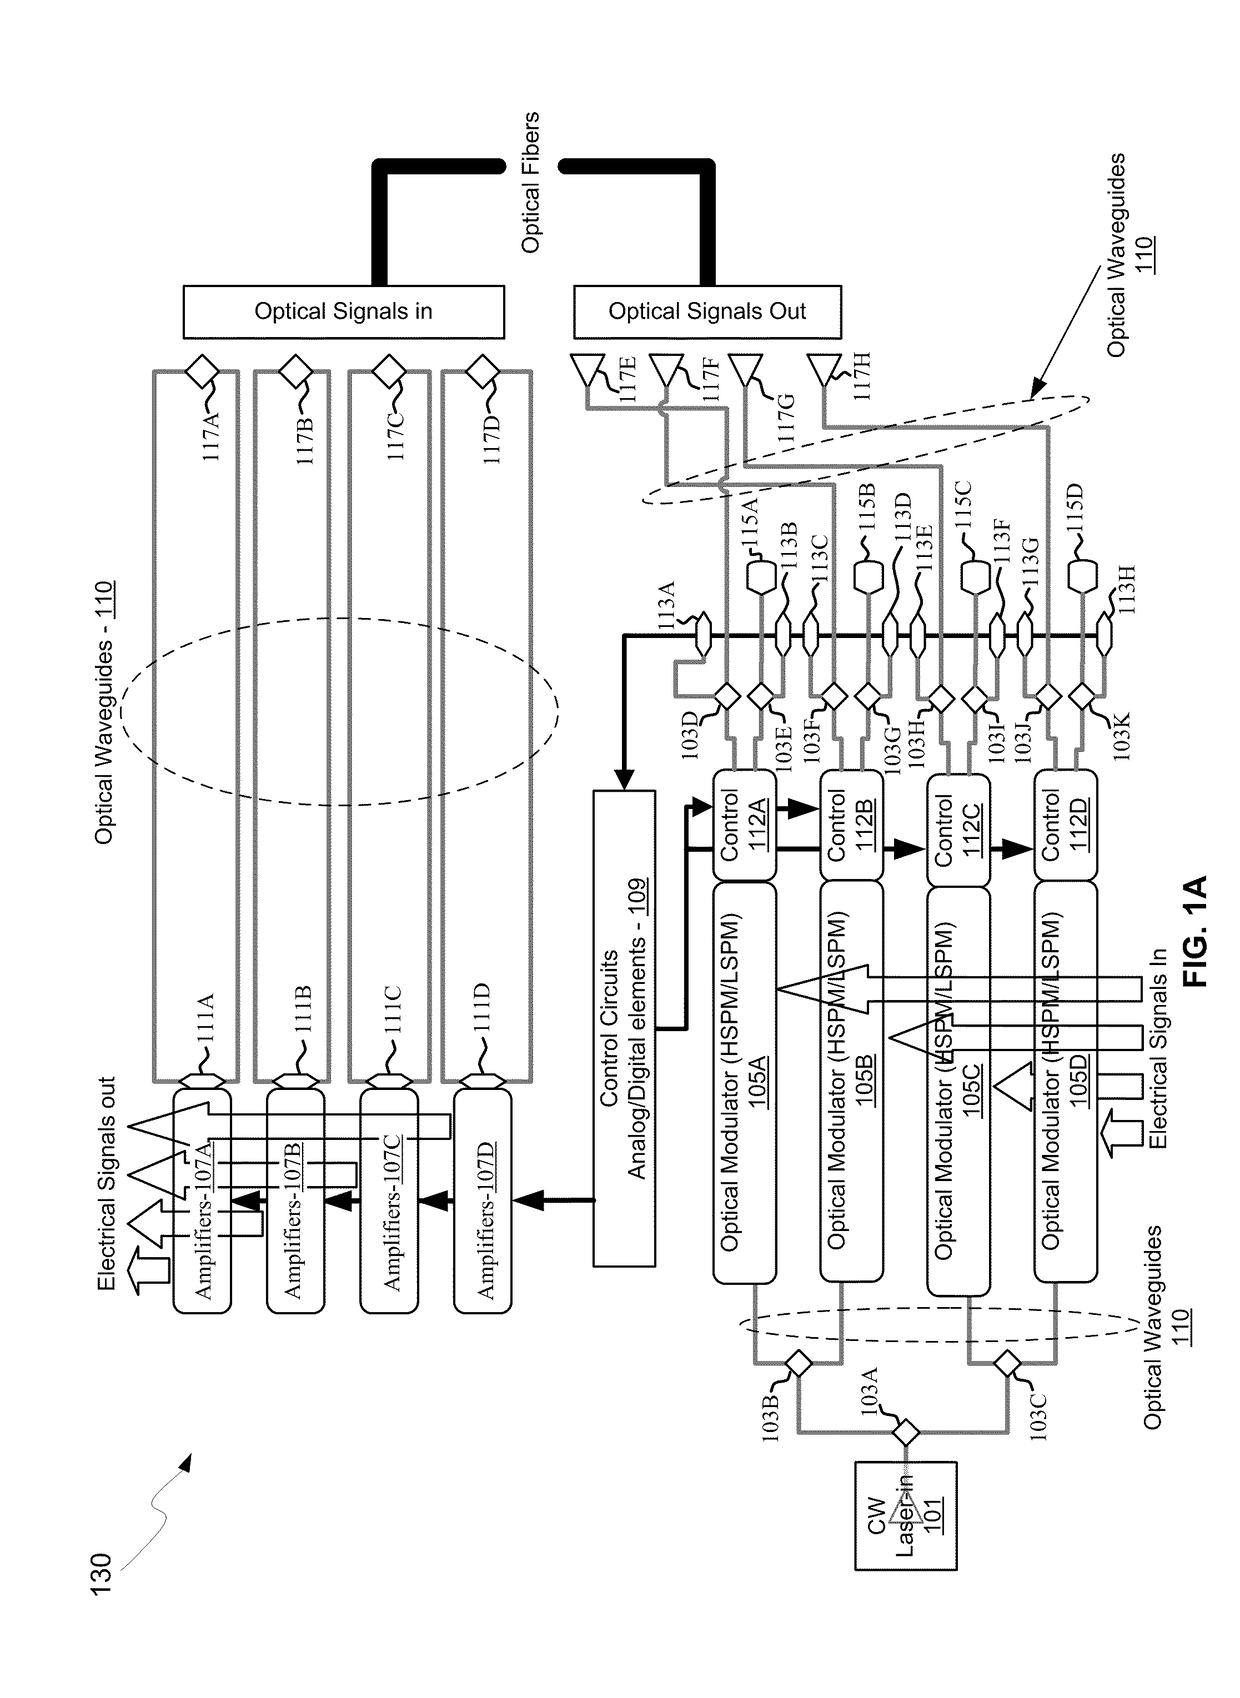 Method and system for a feedback transimpedance amplifier with sub-40khz low-frequency cutoff